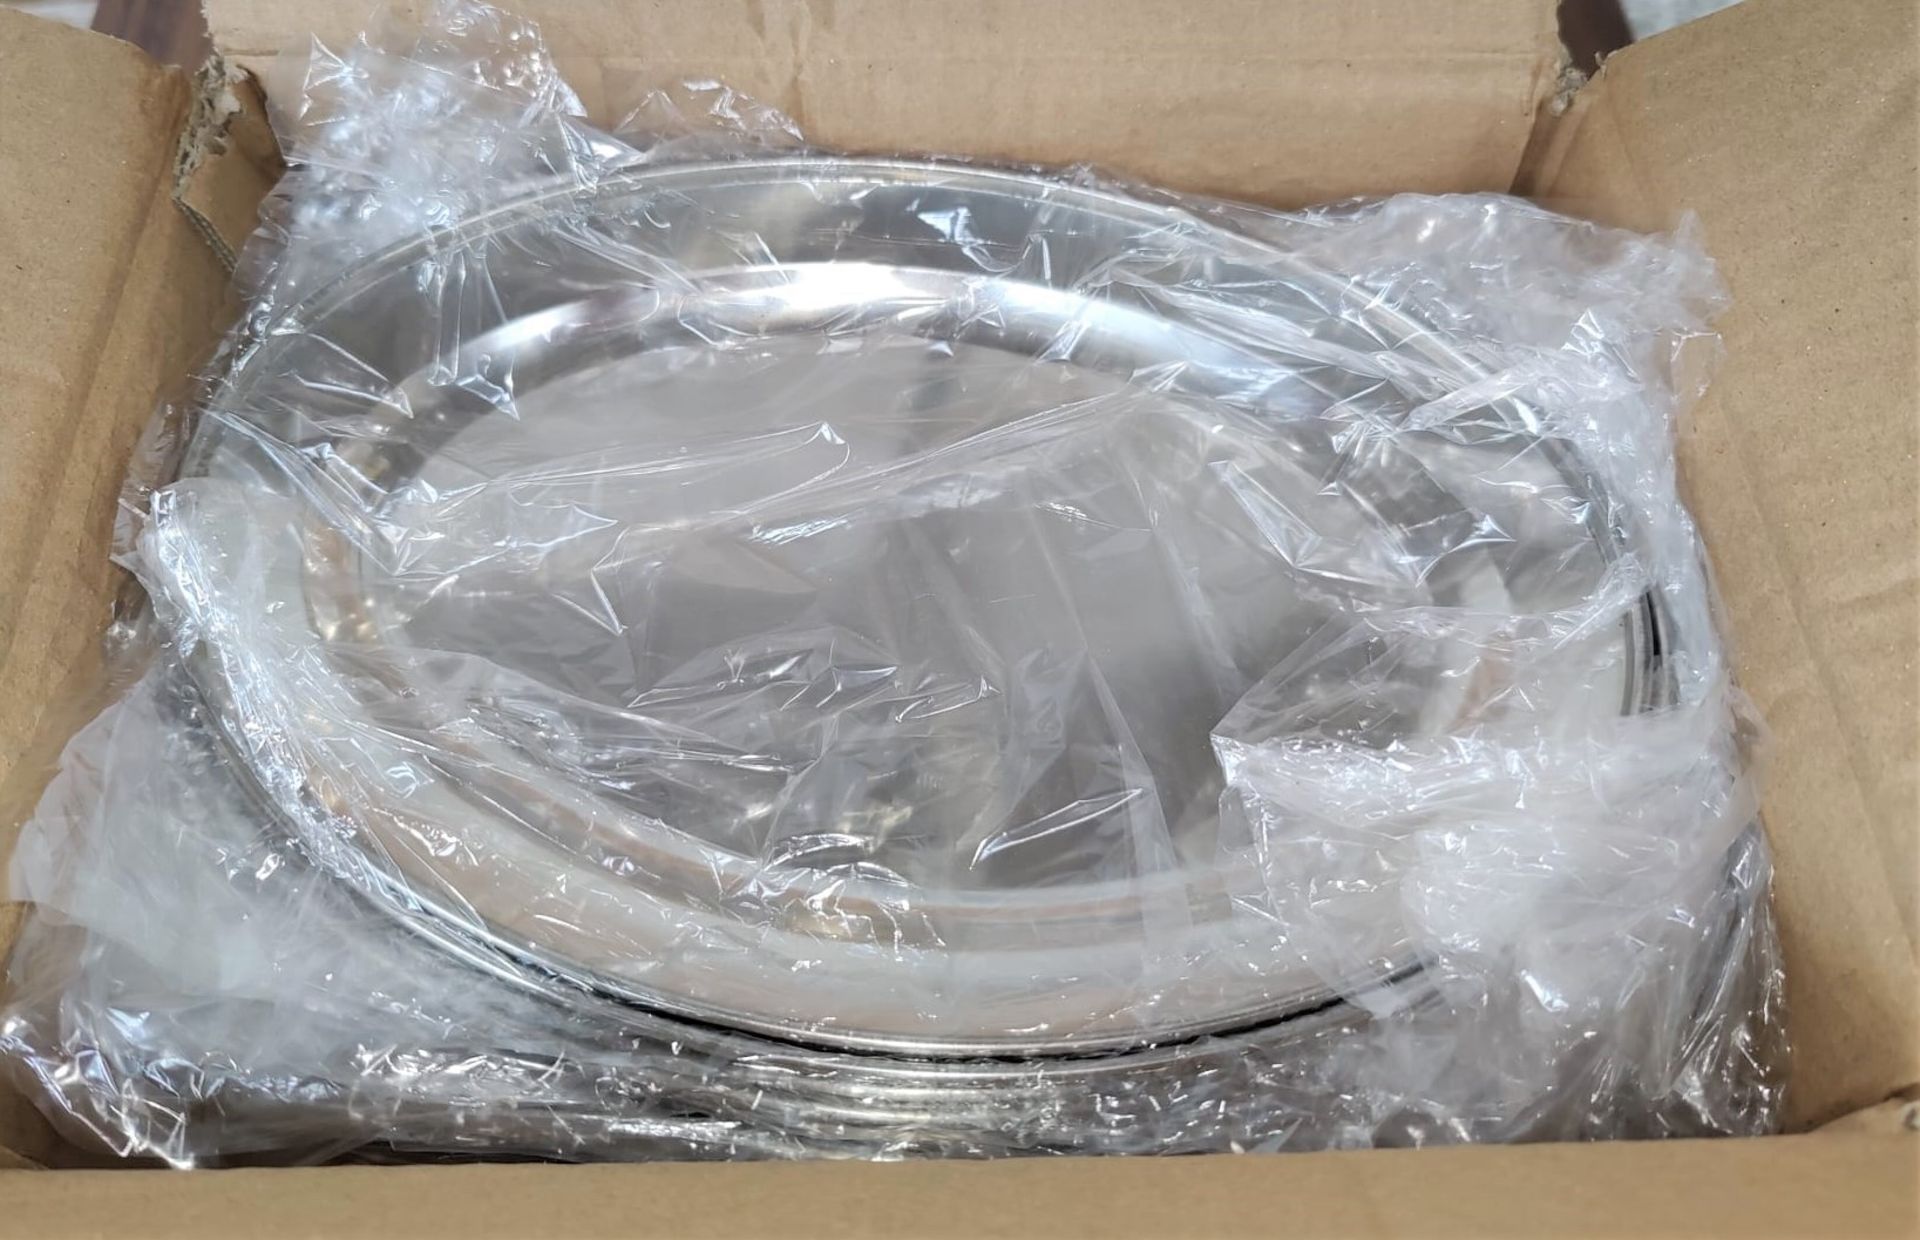 18 x Stainless Steel Small Oval Service Trays - Size: 255mm x 180mm - Brand New Boxed Stock RRP £90 - Image 5 of 7